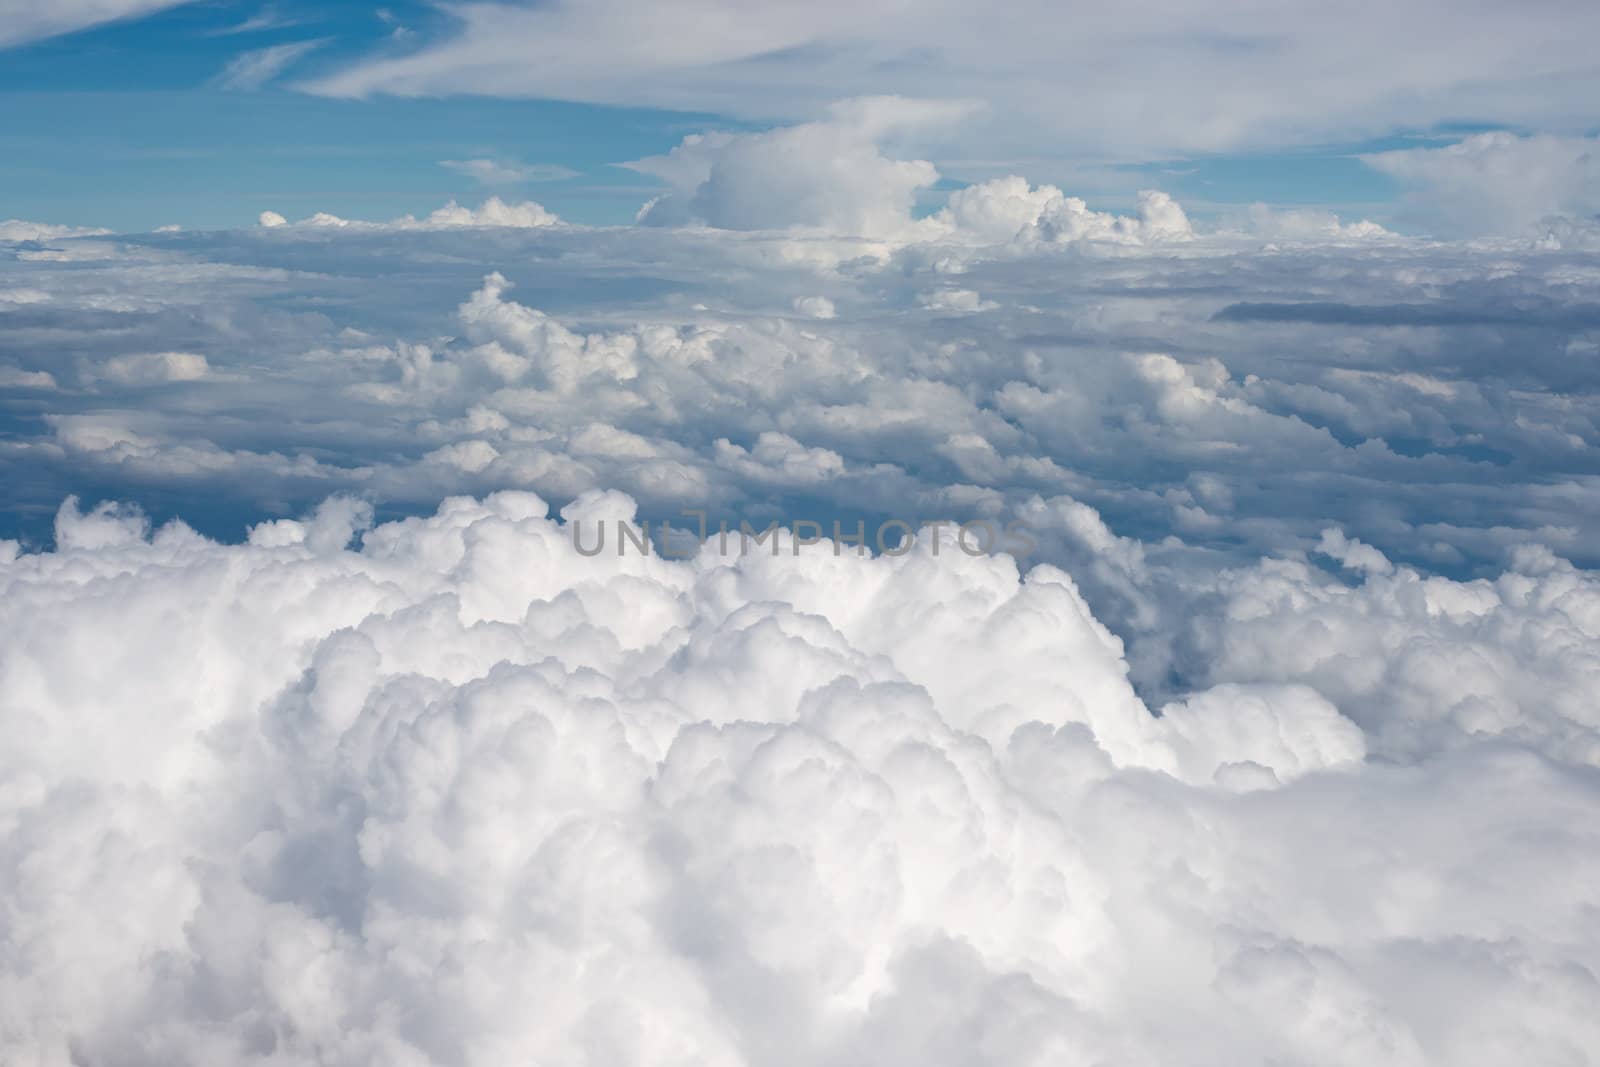 Aerial view on white fluffy clouds